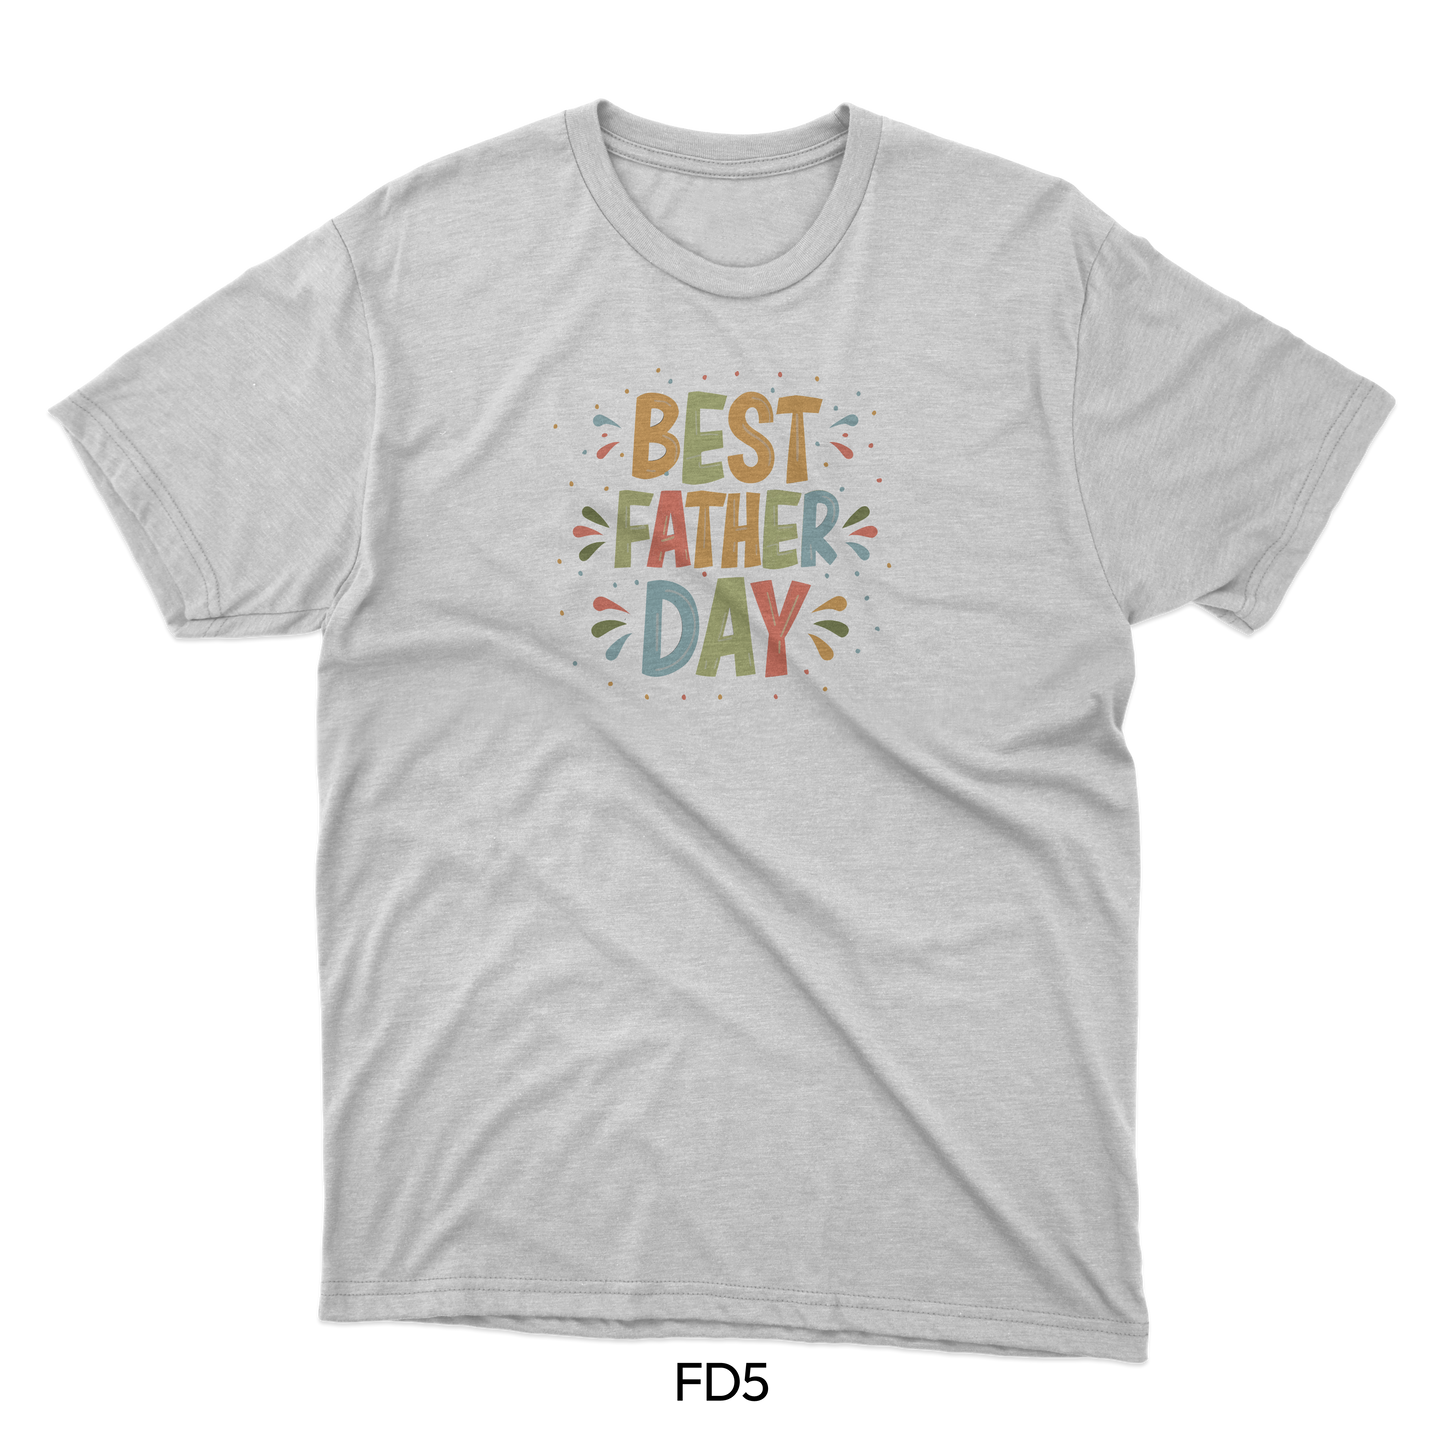 Best Father's Day - Father's Day Designs (FD5)